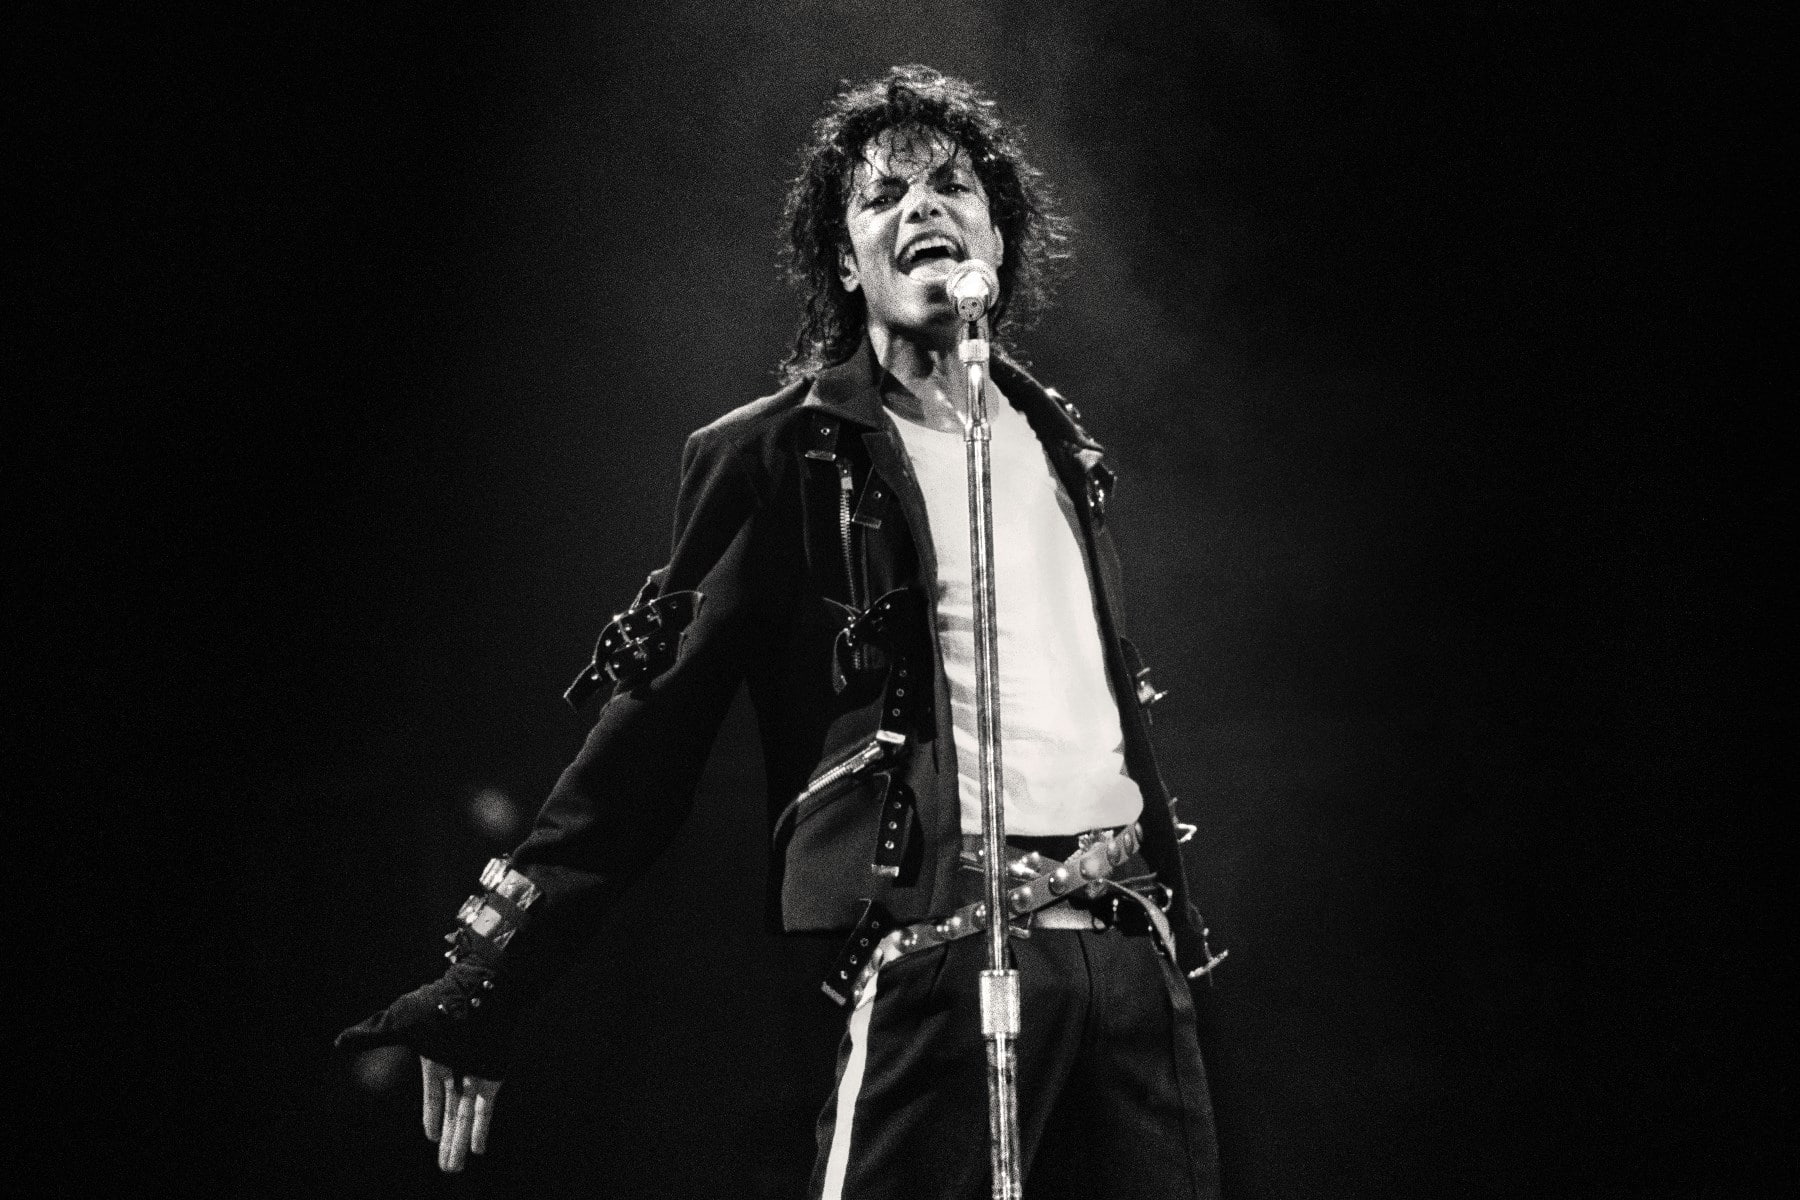 michael jackson, one person, music, musician, arts culture and entertainment